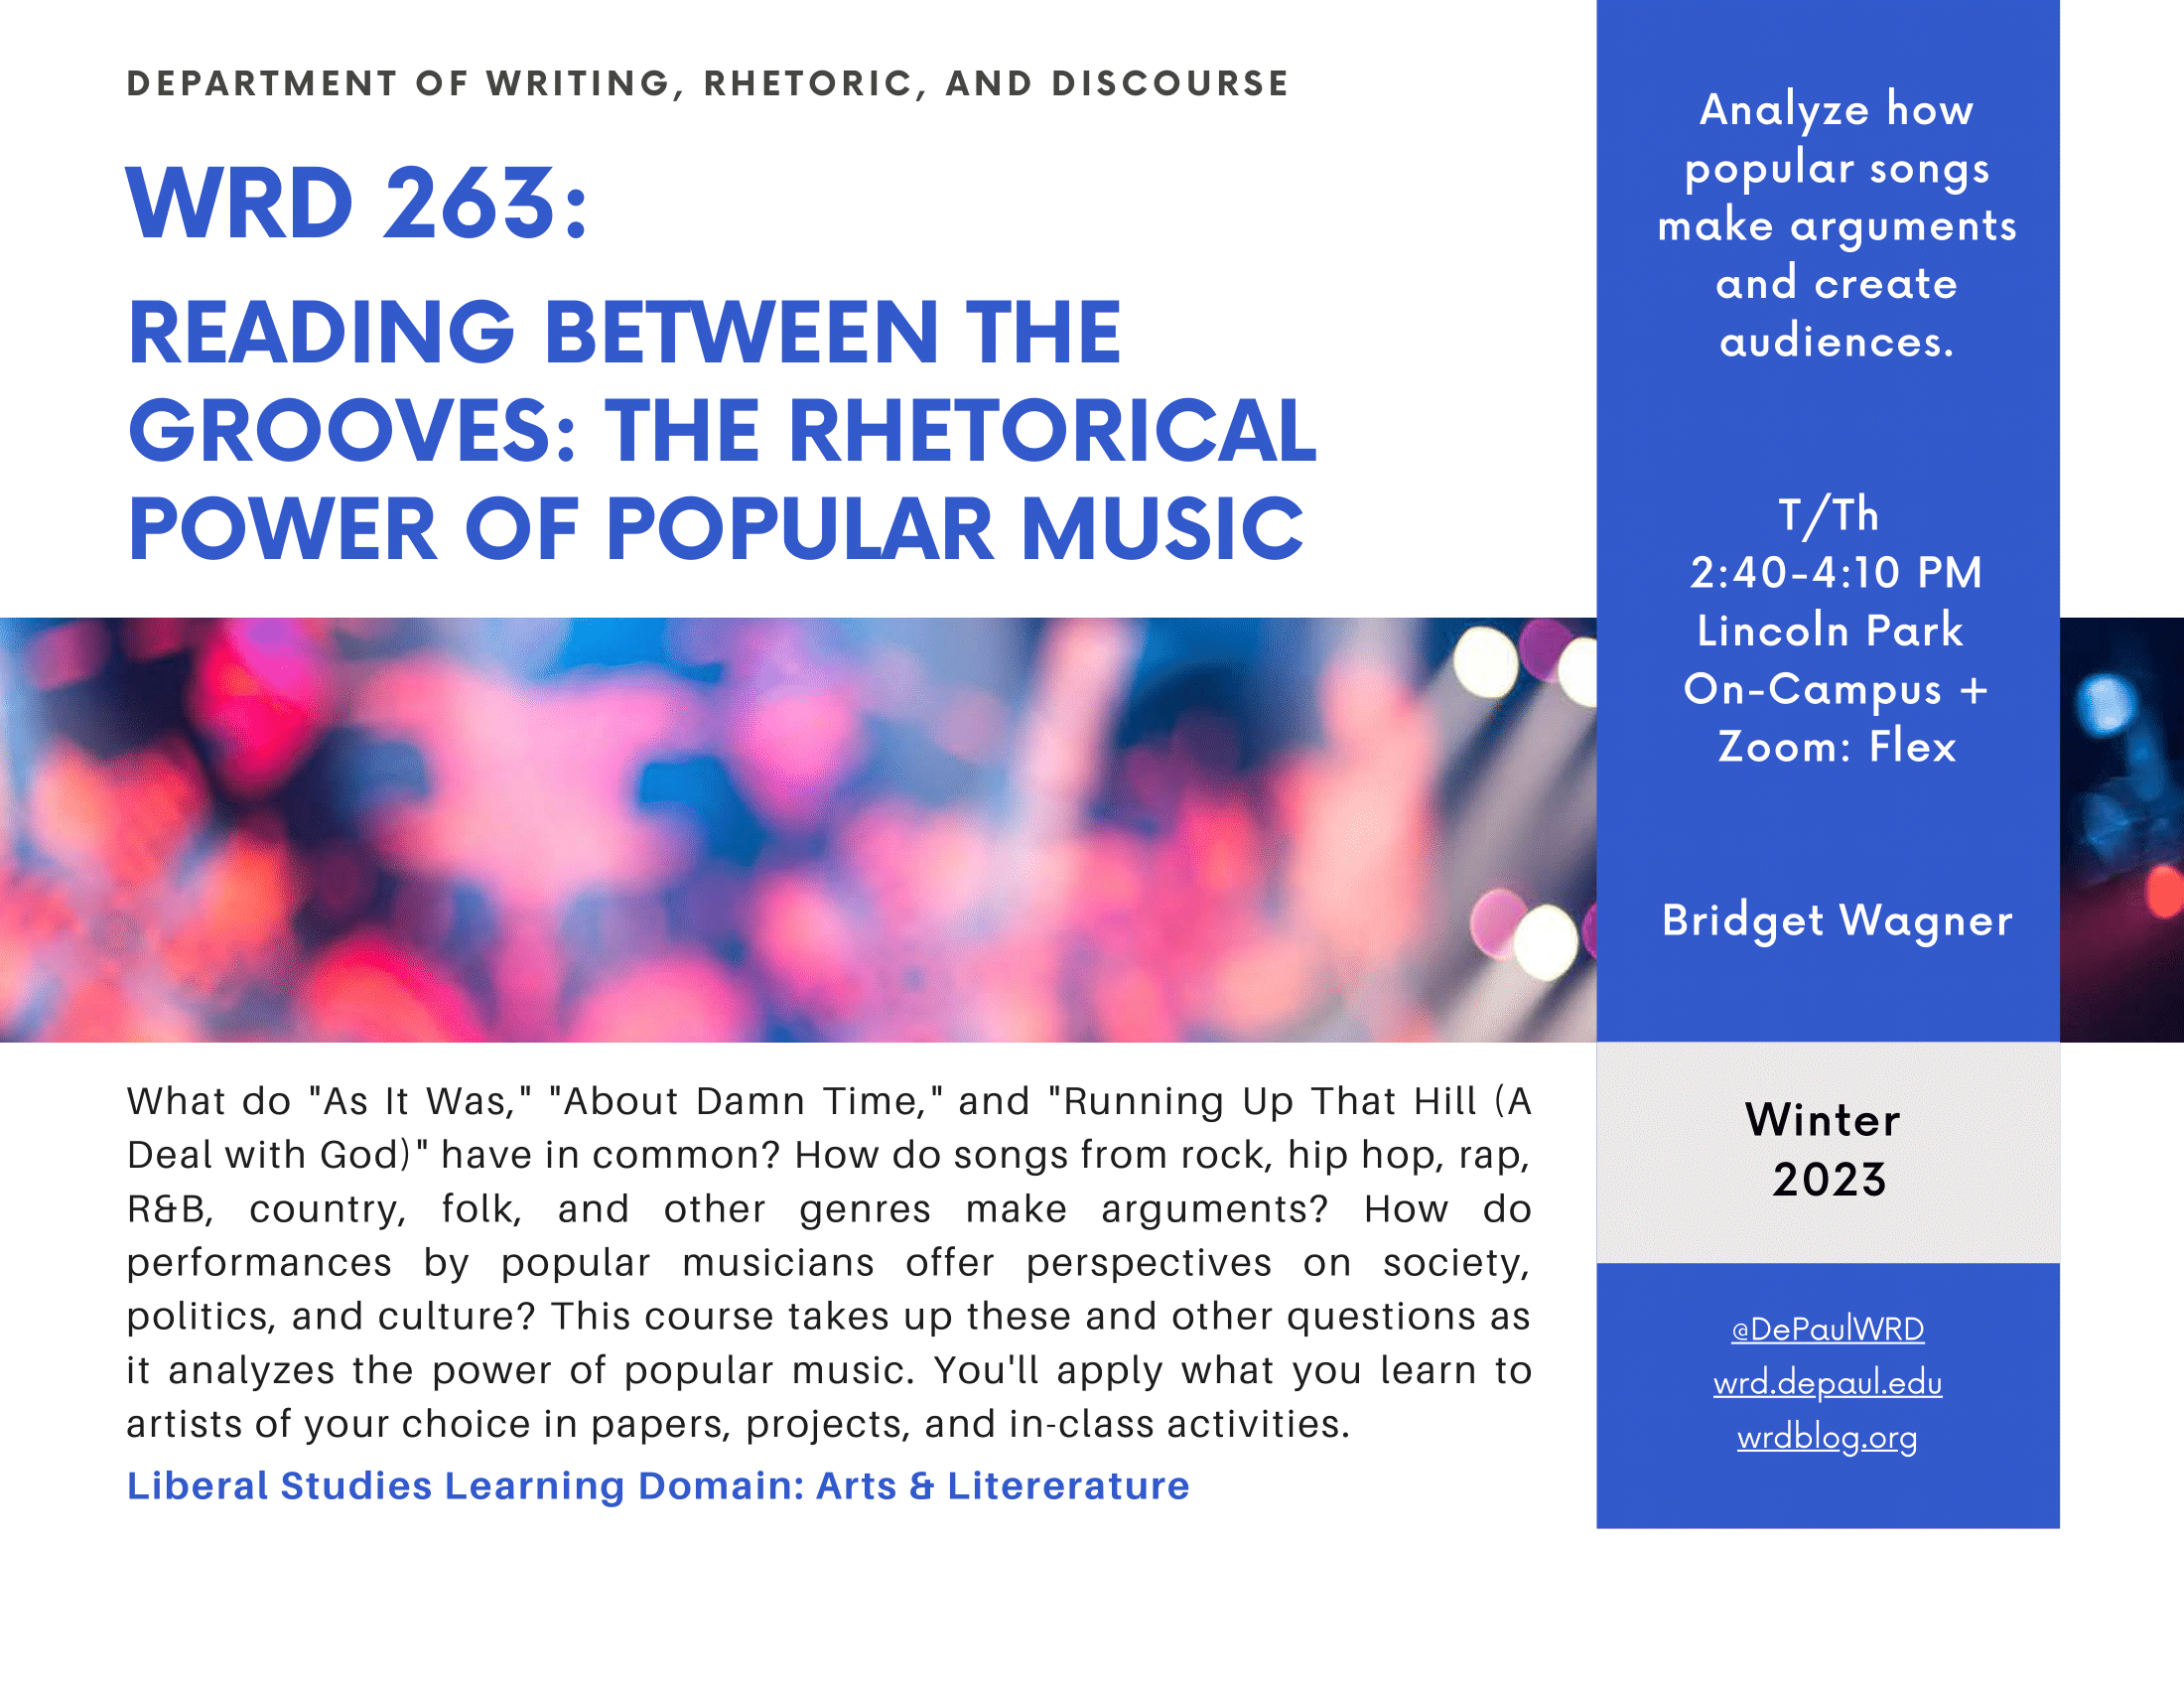 WRD 263: READING BETWEEN THE GROOVES: THE RHETORICAL POWER OF POPULAR MUSIC